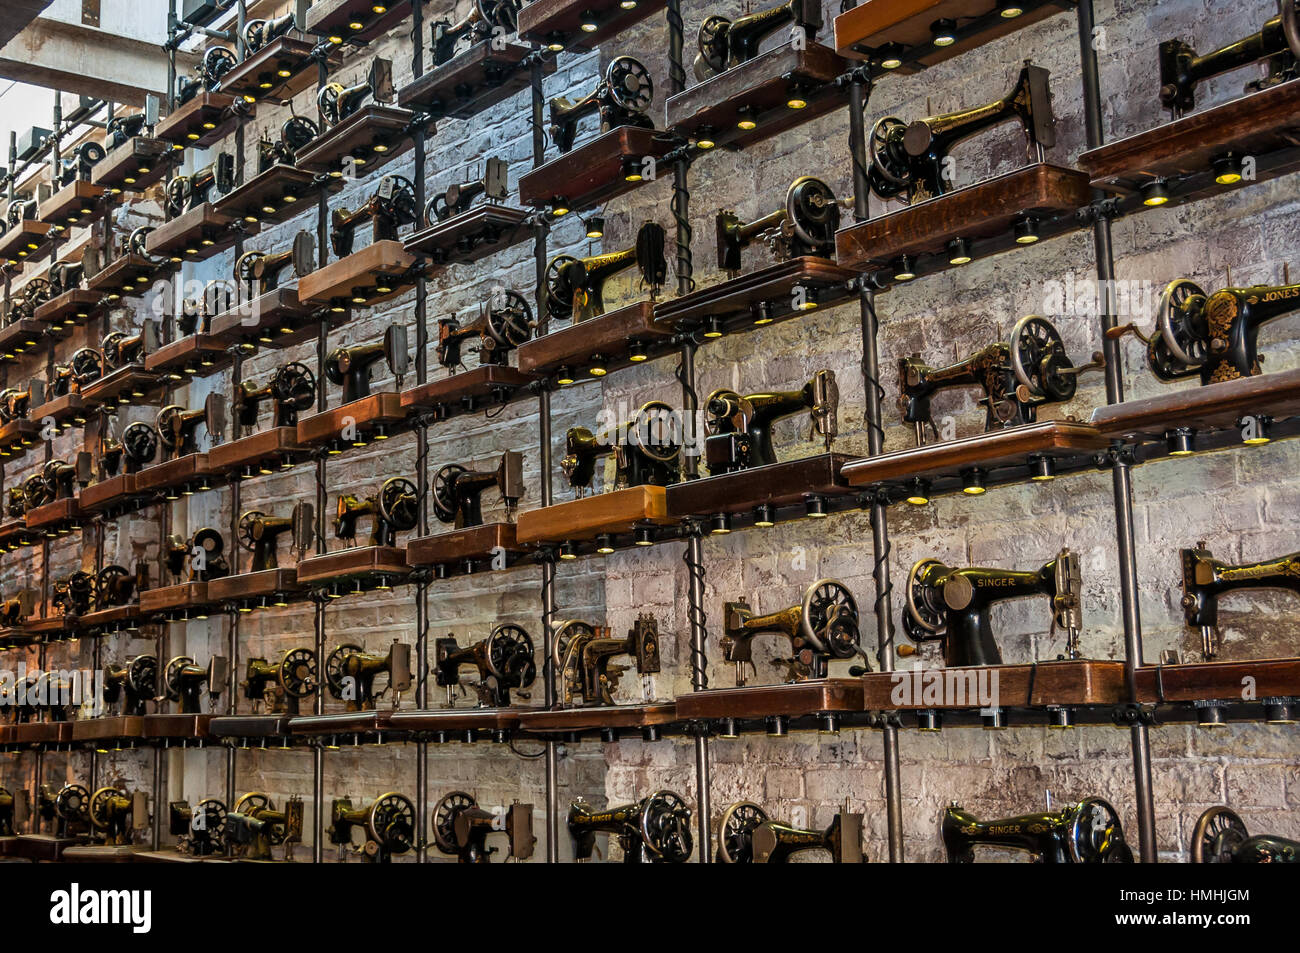 Old sewing machines on a wall in a shop Stock Photo